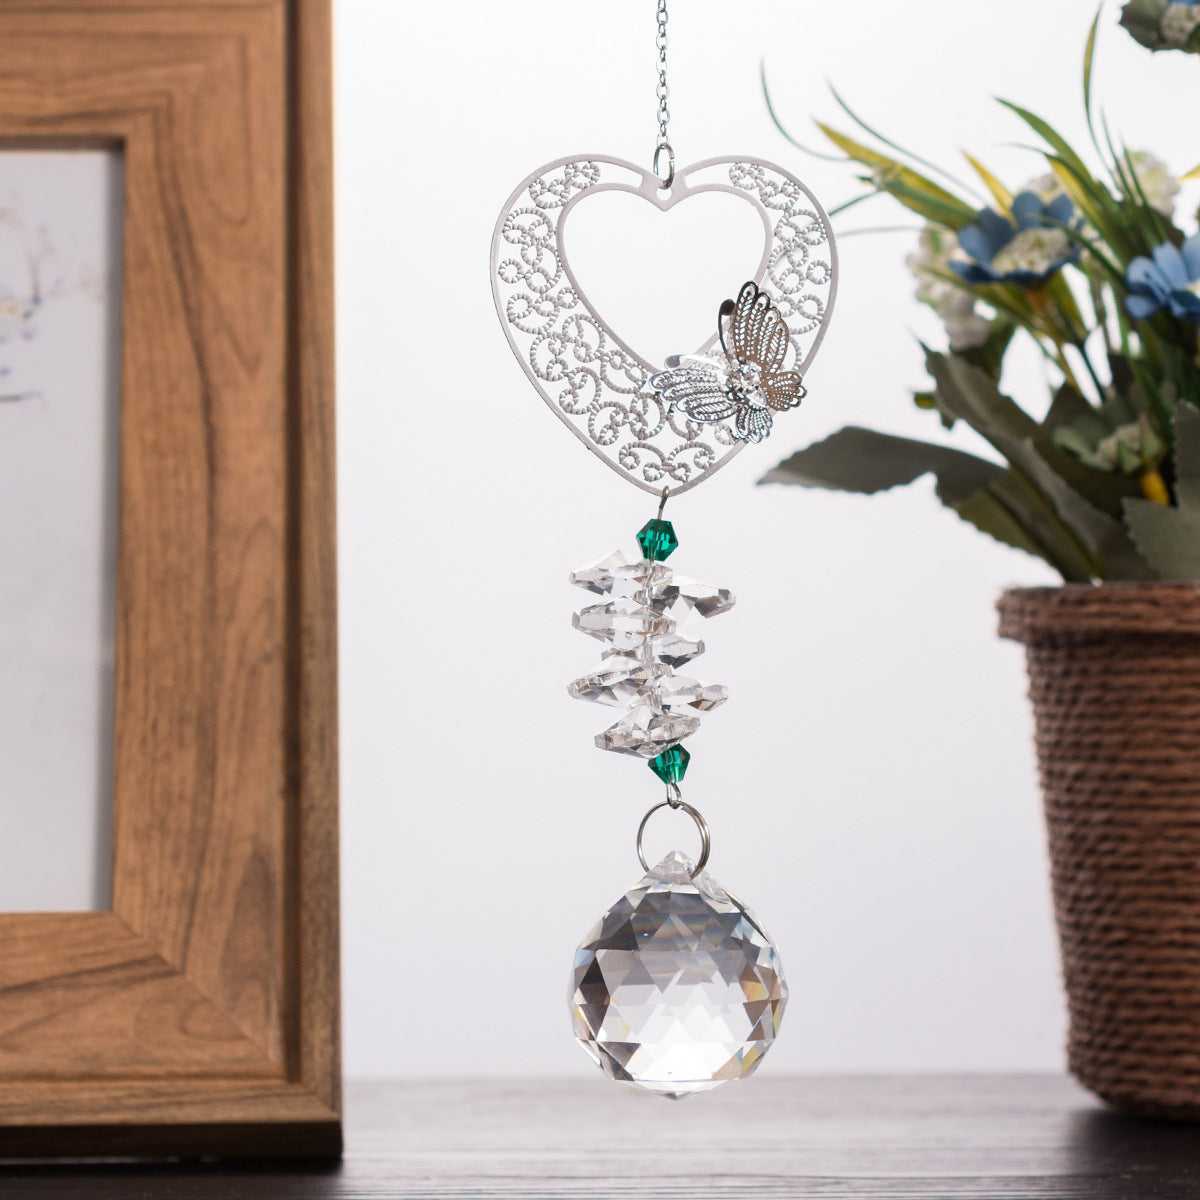 Crystal Suncatcher With Metal Art For Home Decoration